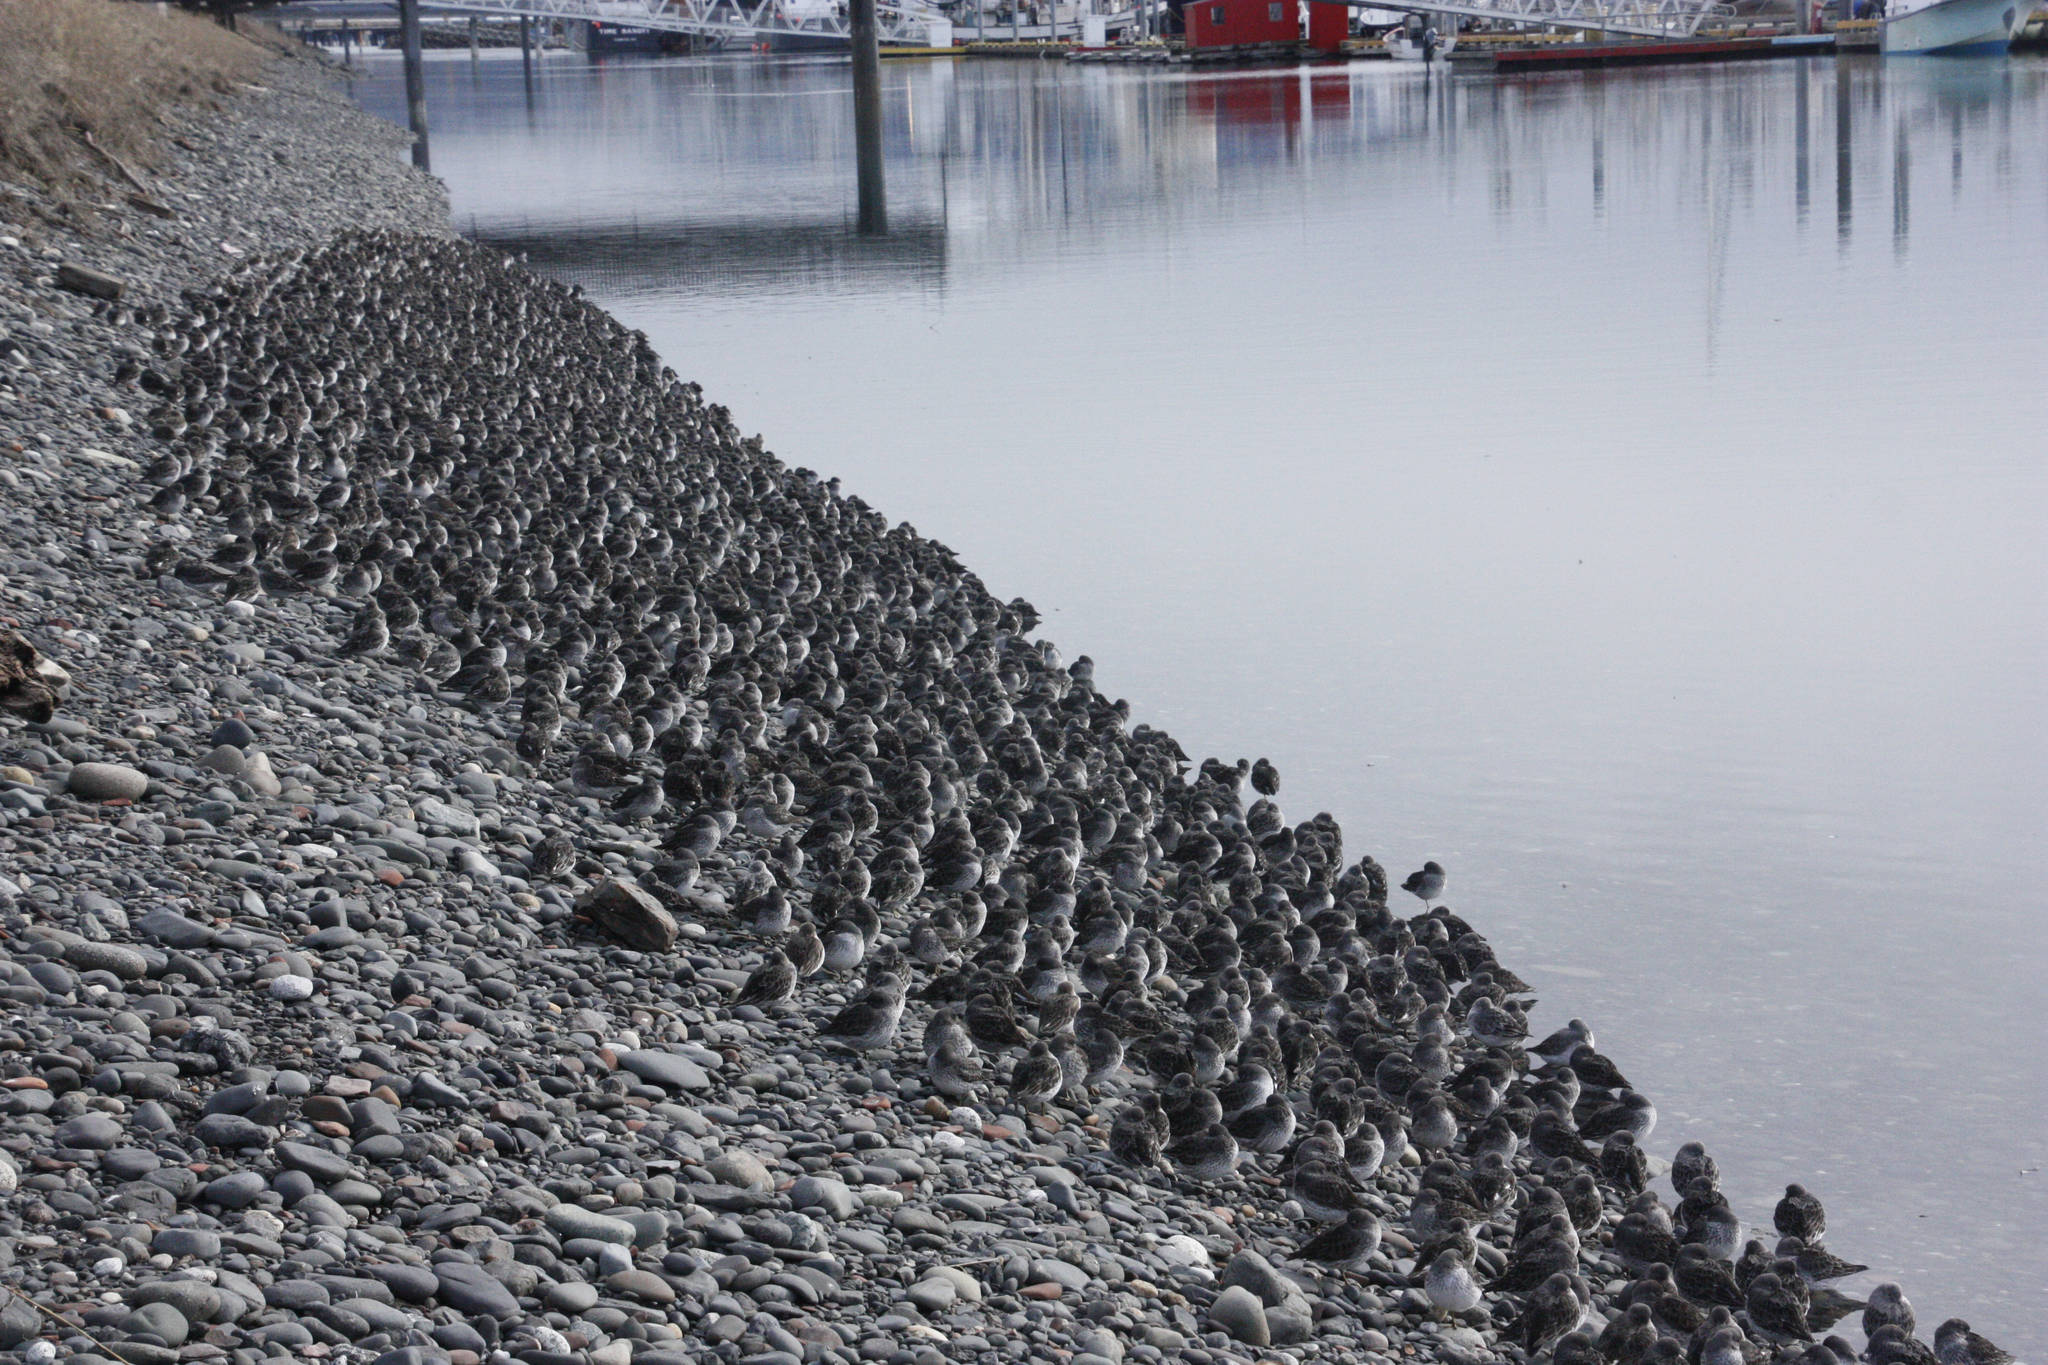 A flock of rock sandpipers roost at the Homer Harbor in March of 2016 in Homer, Alaska. (Photo by George Matz)